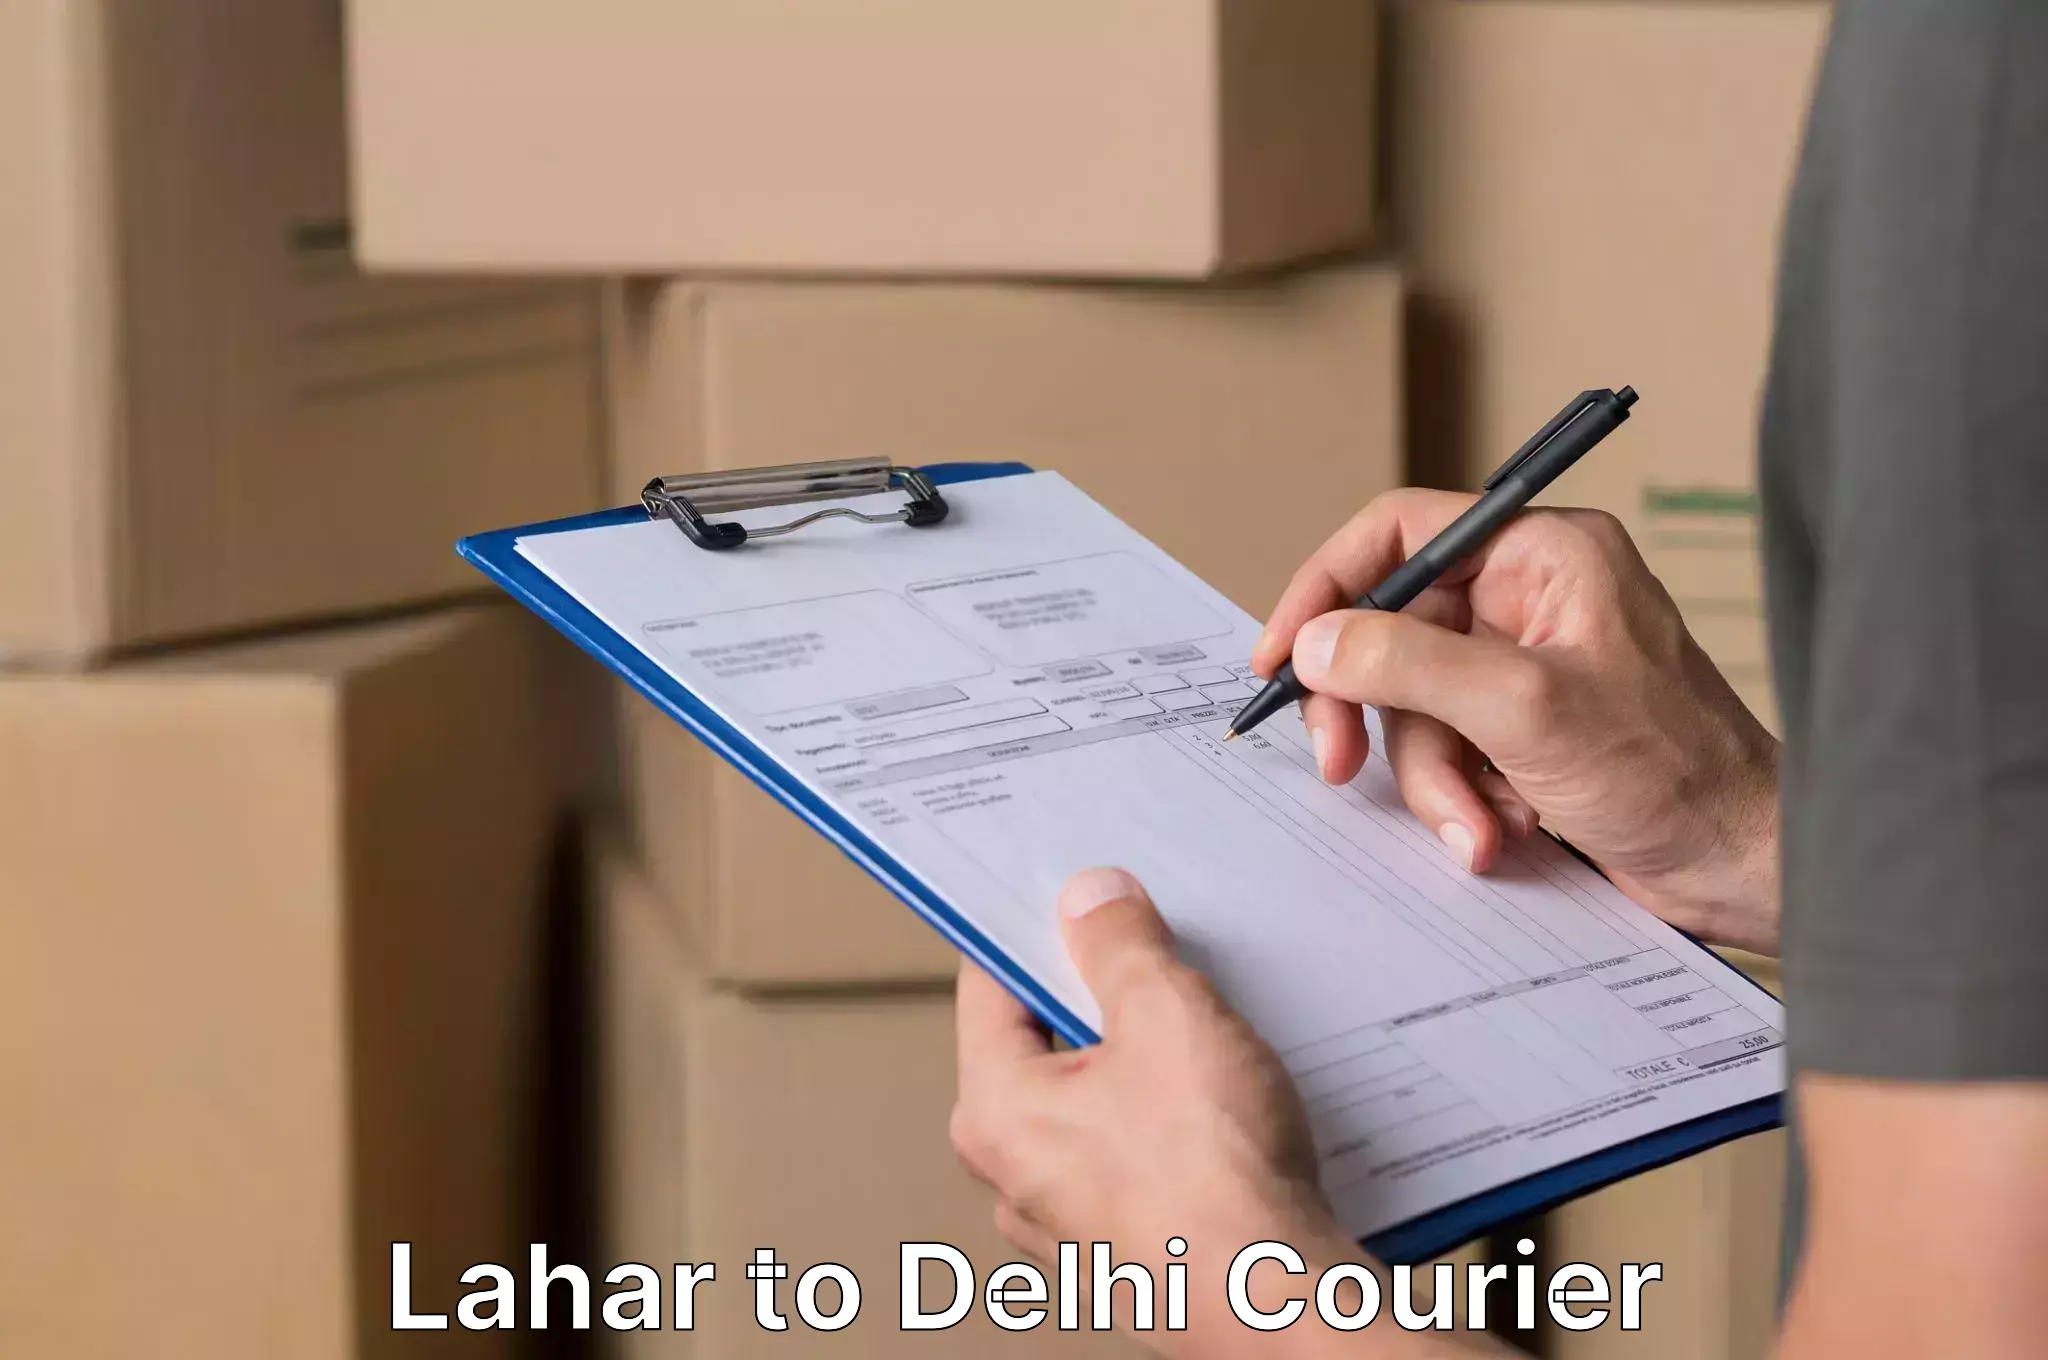 Full home relocation services Lahar to Lodhi Road